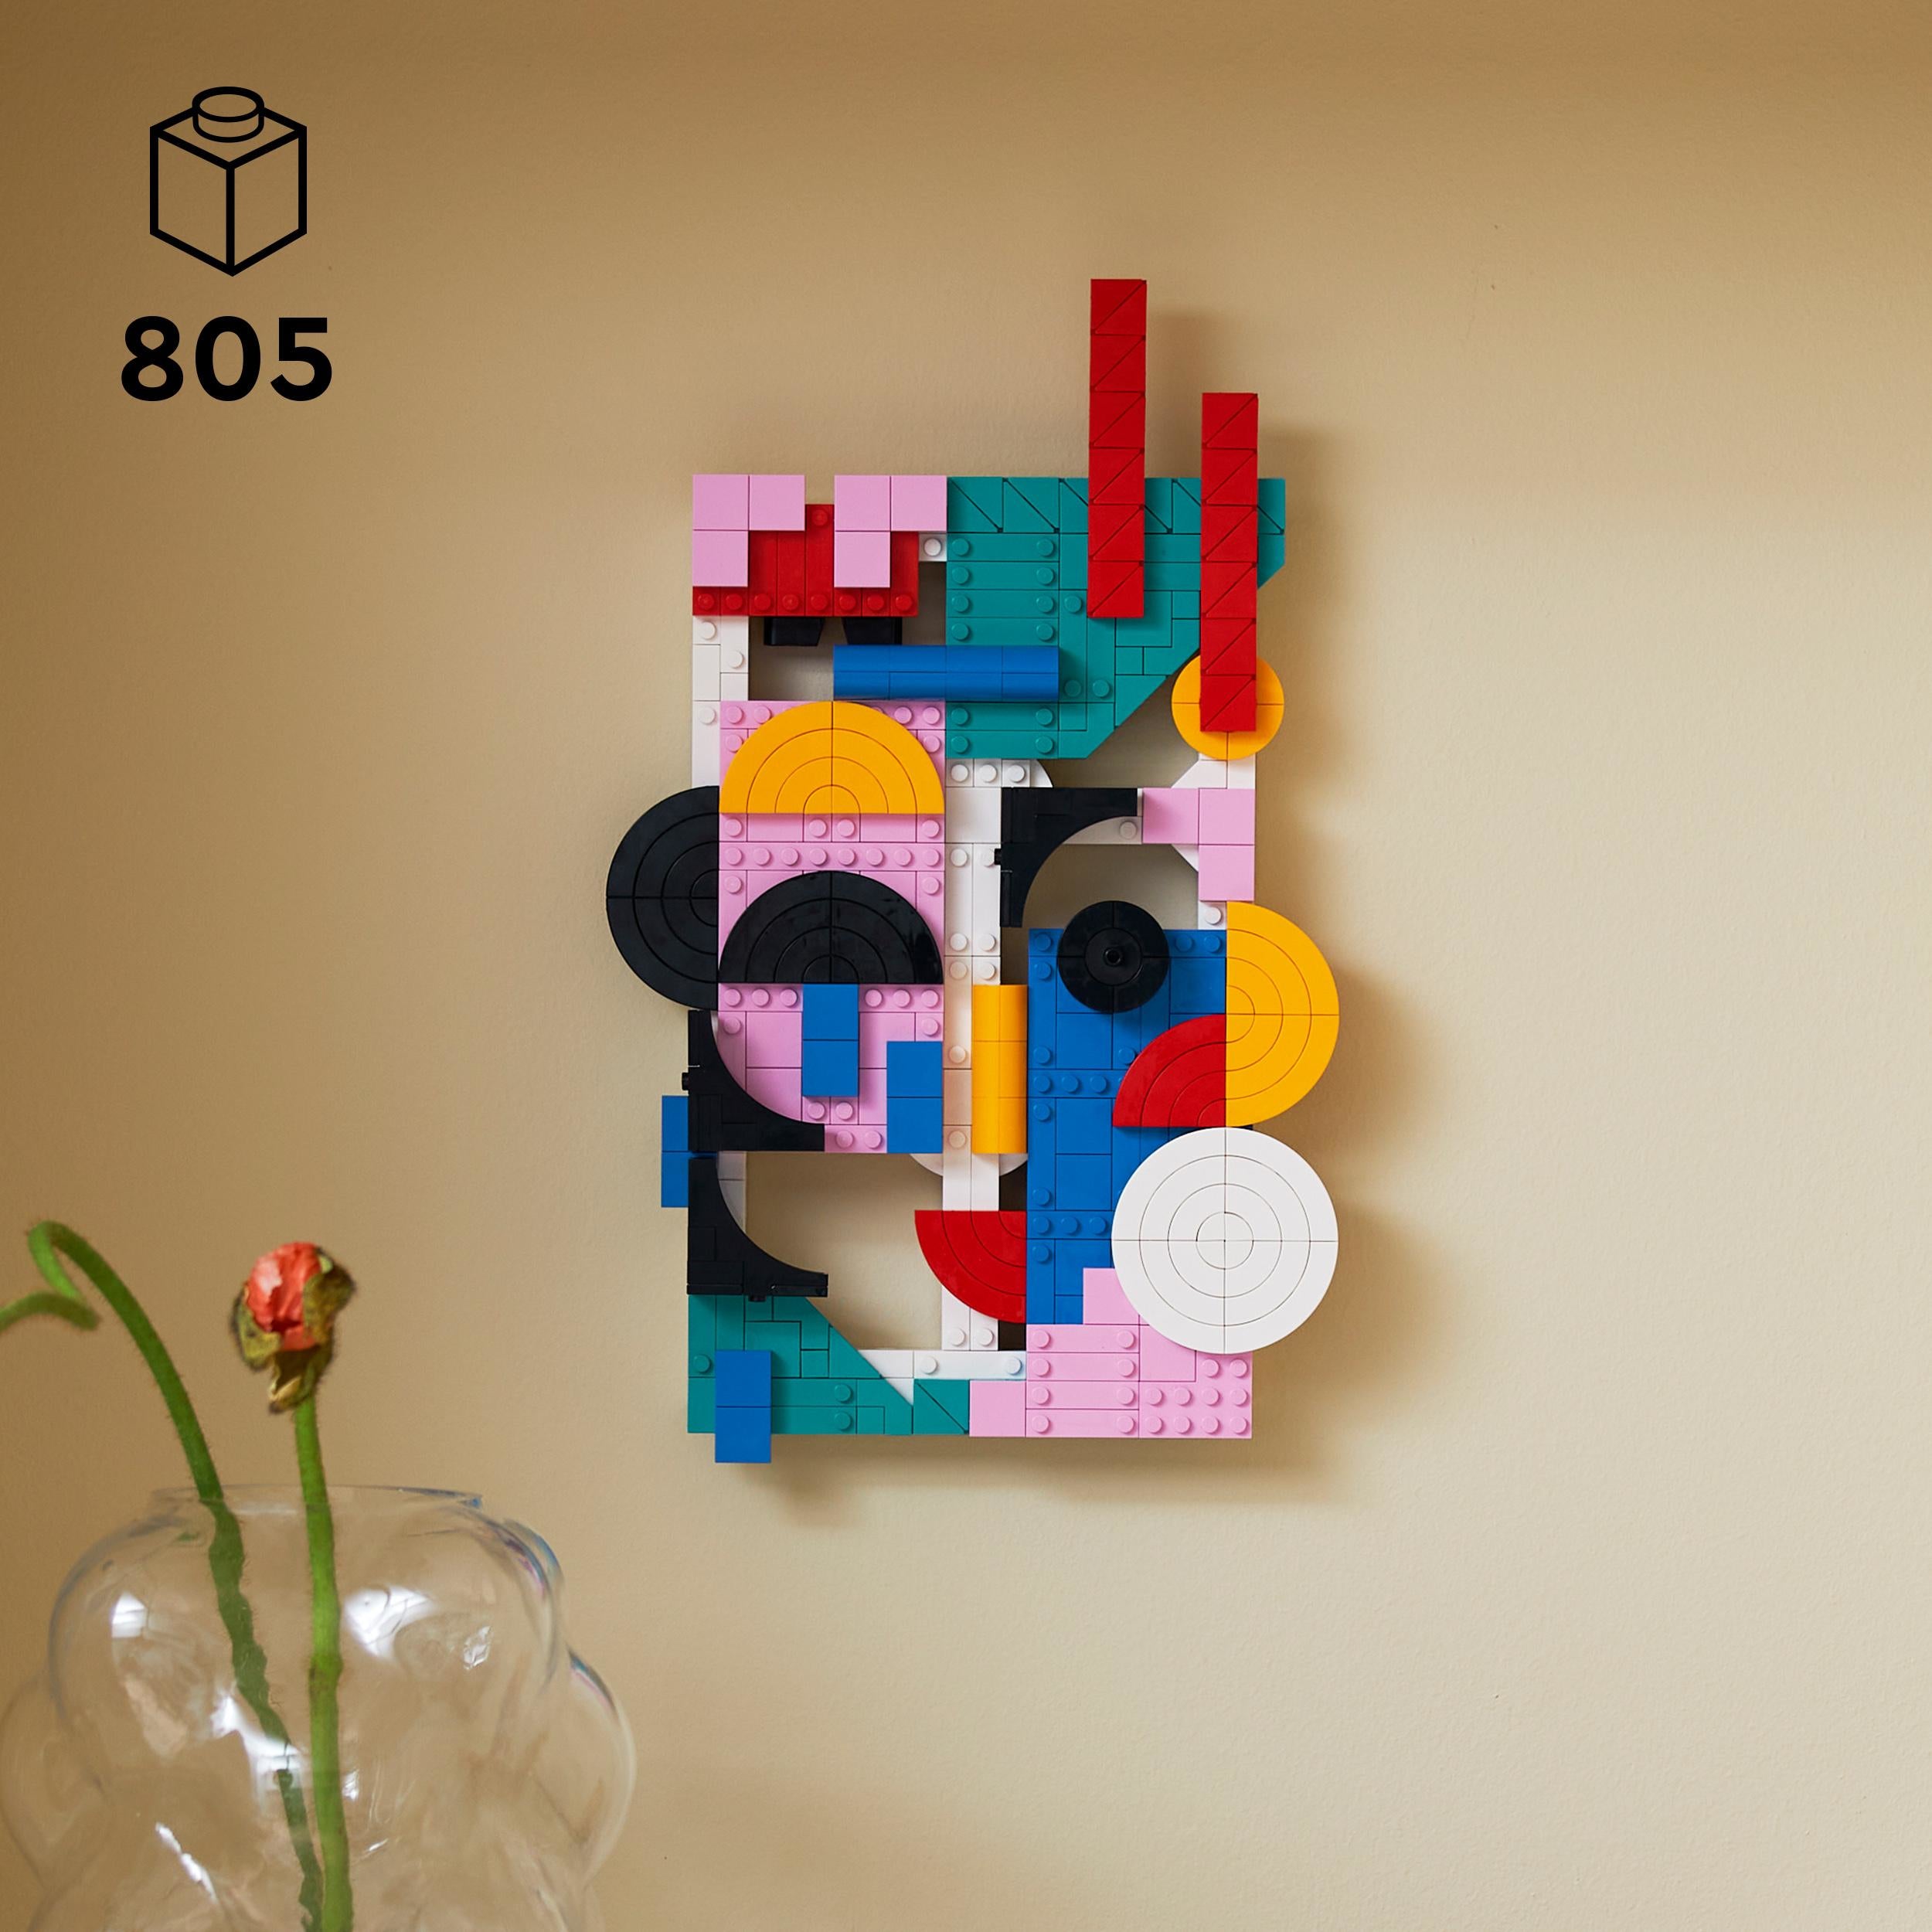 LEGO 31210 ART Modern Art Set, Create A Colourful Abstract Wall Canvas, Home Decor for Living Room or Bedroom, Crafts Creative Activity for Adults and Teens, Gift for Women, Men